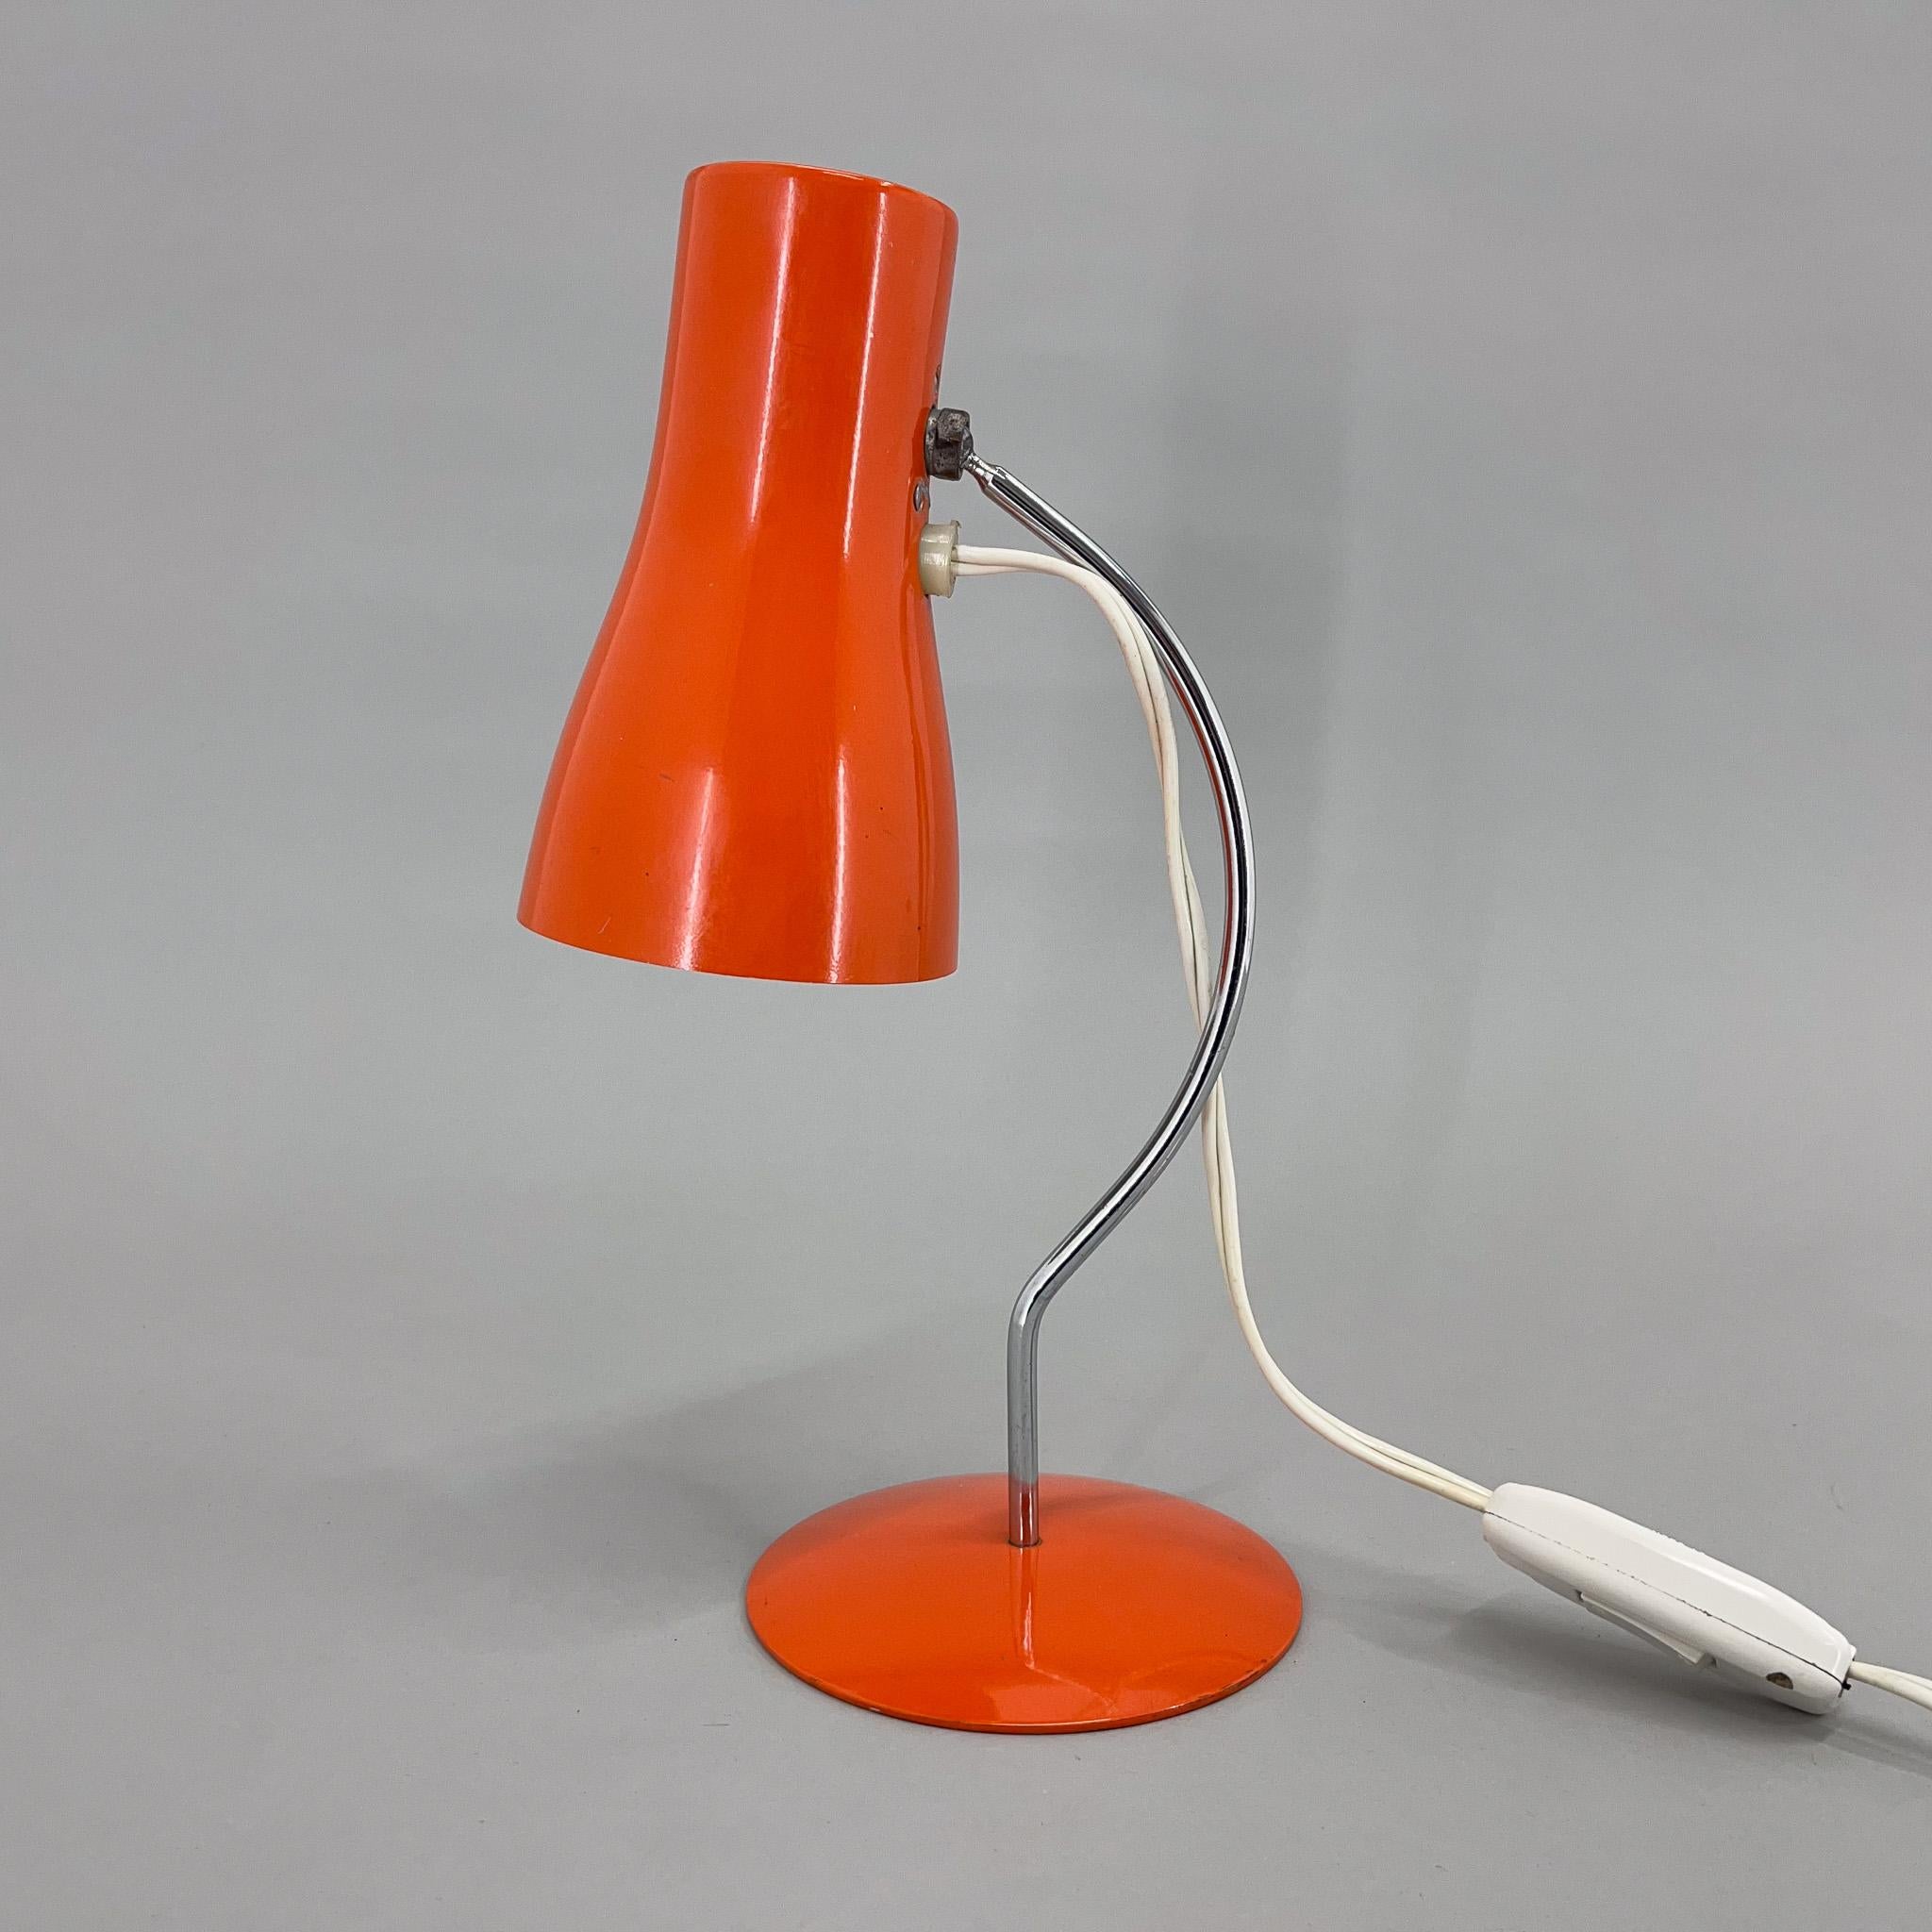 Vintage orange metal and chrome table lamp with adjustable lamp shade designed by the famous Josef Hůrka. Produced in former Czechoslovakia in the 1970's. Bulb: 1x E14. US plug adapter included.